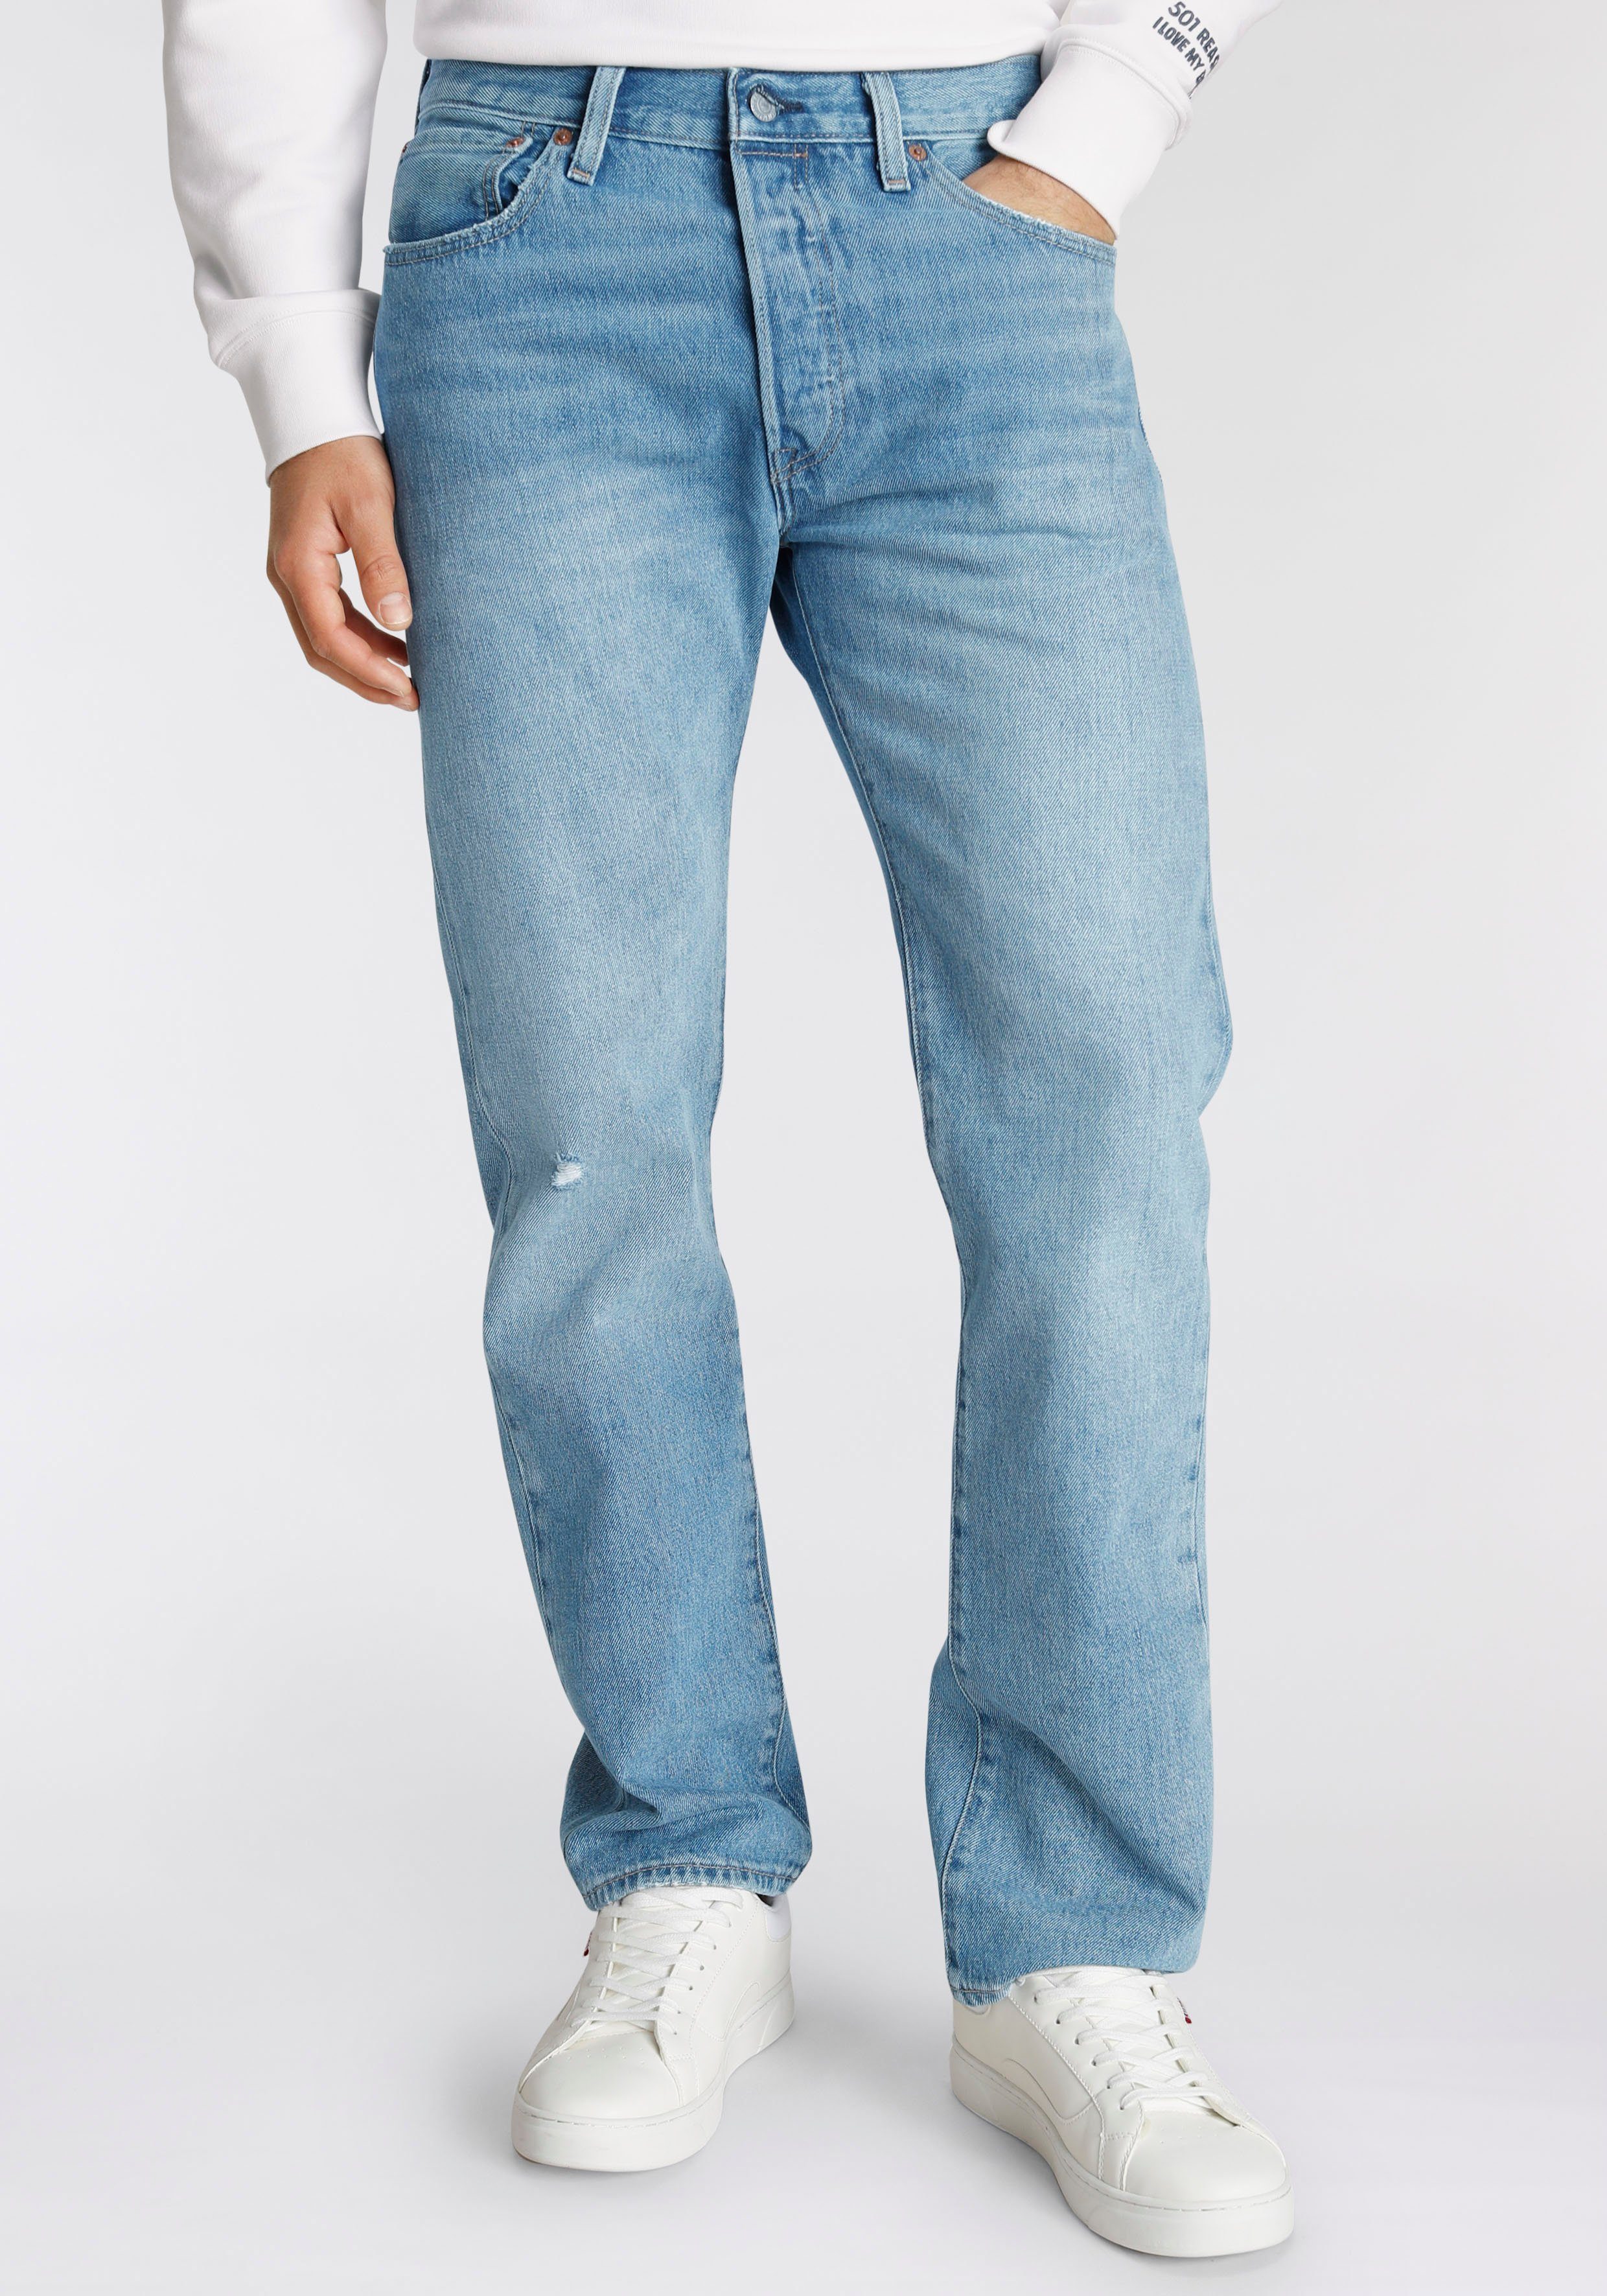 Levi's® Straight-Jeans 501®, Gerades Bein, normale Leibhöhe